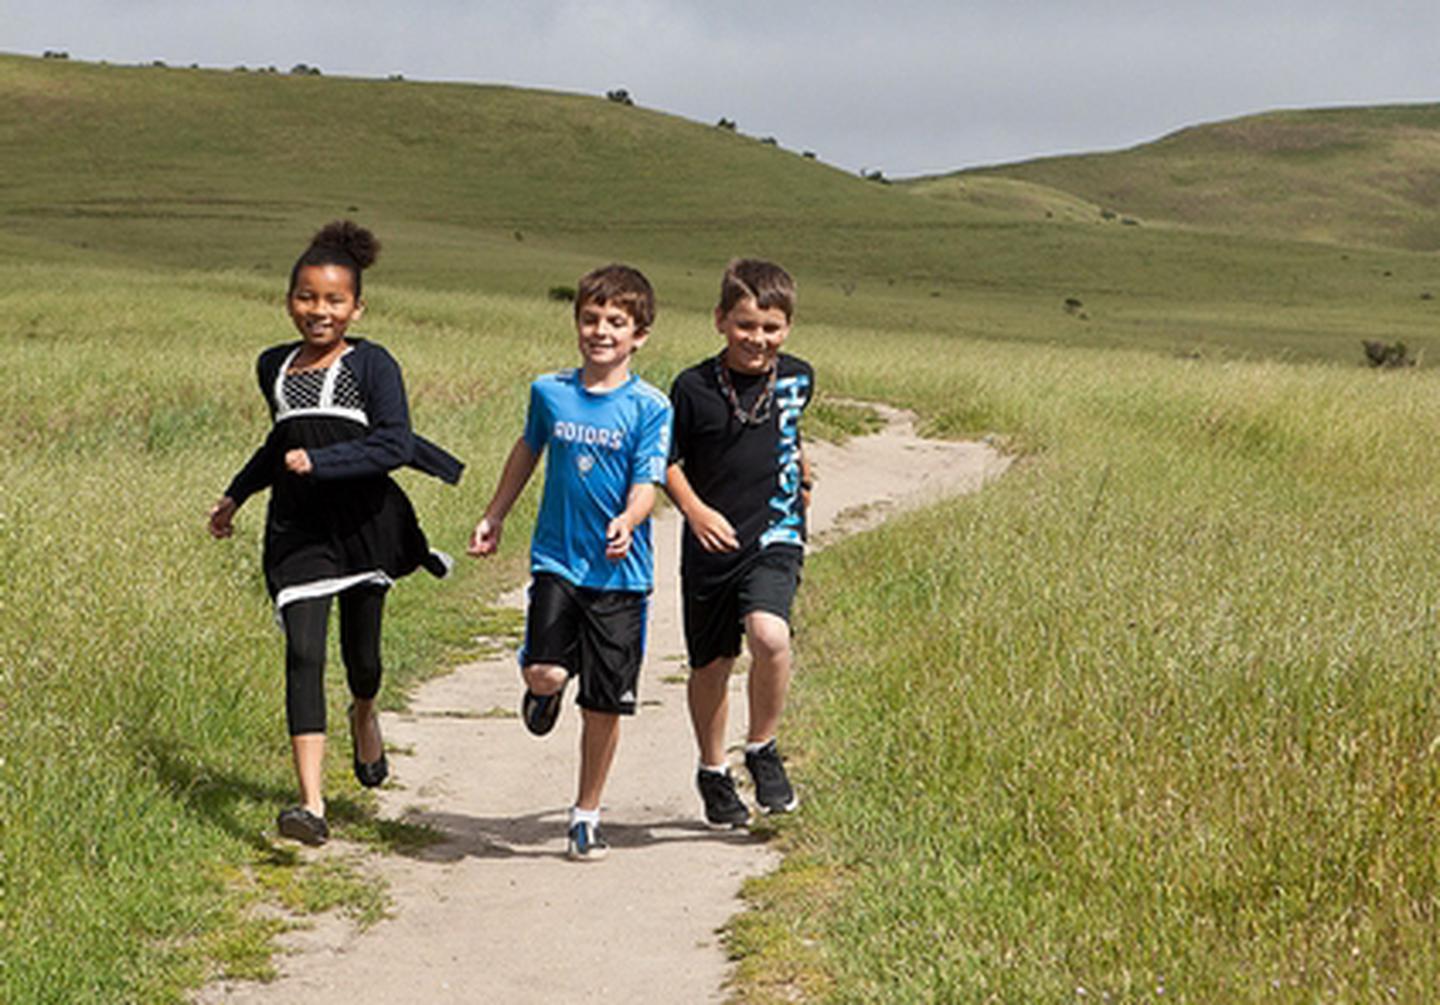 Outdoor ClassroomElementary school hildren run, play, and learn at the Fort Ord National Monument.